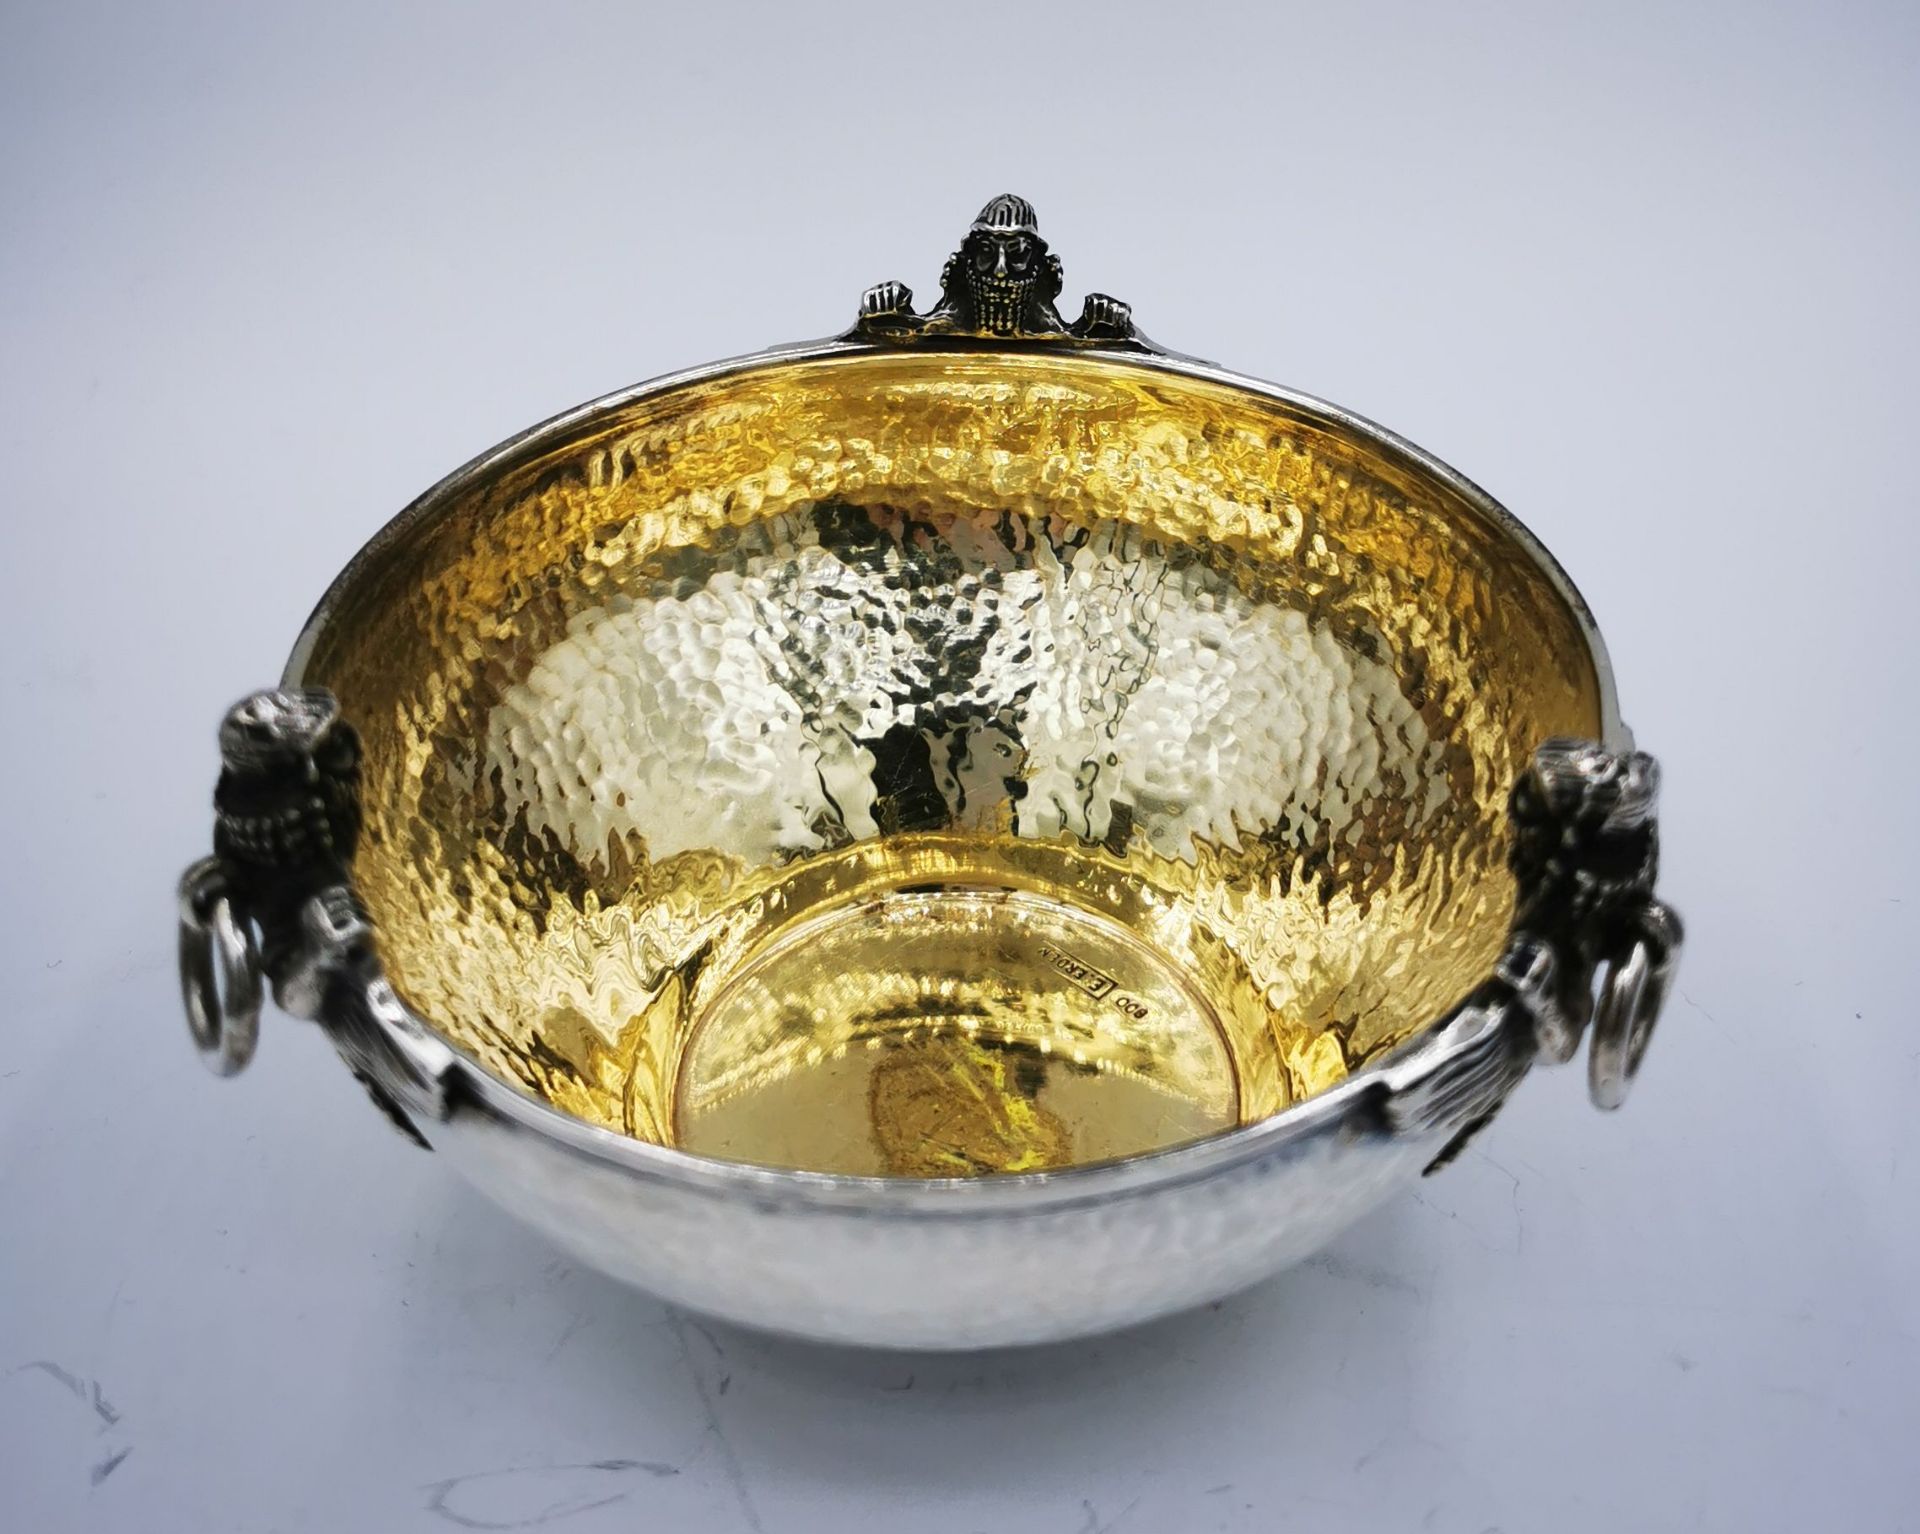 BOWL WITH ANTIQUE DECORATION - Image 3 of 8